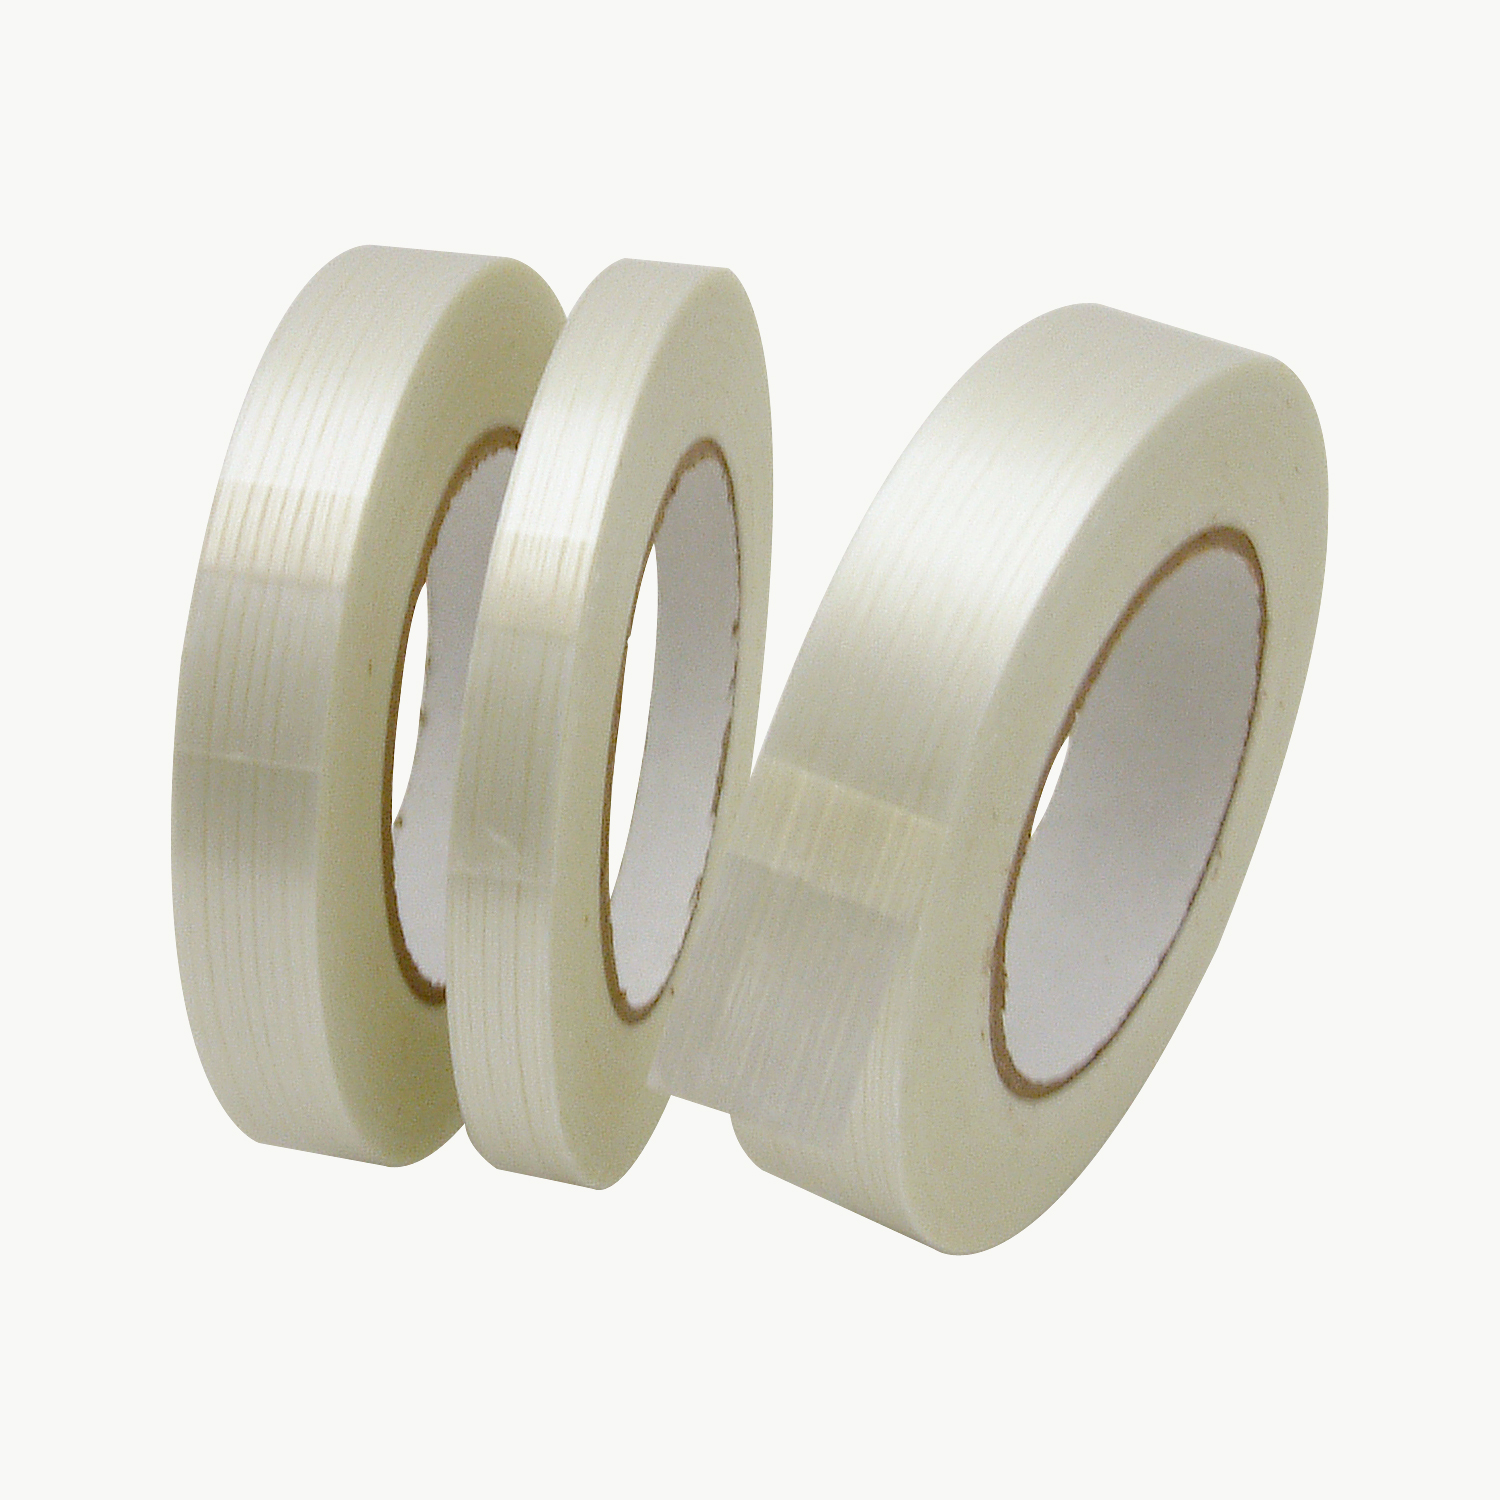 Professional Filament Tape 55yds Packing Tapes Filament Strapping Tape 